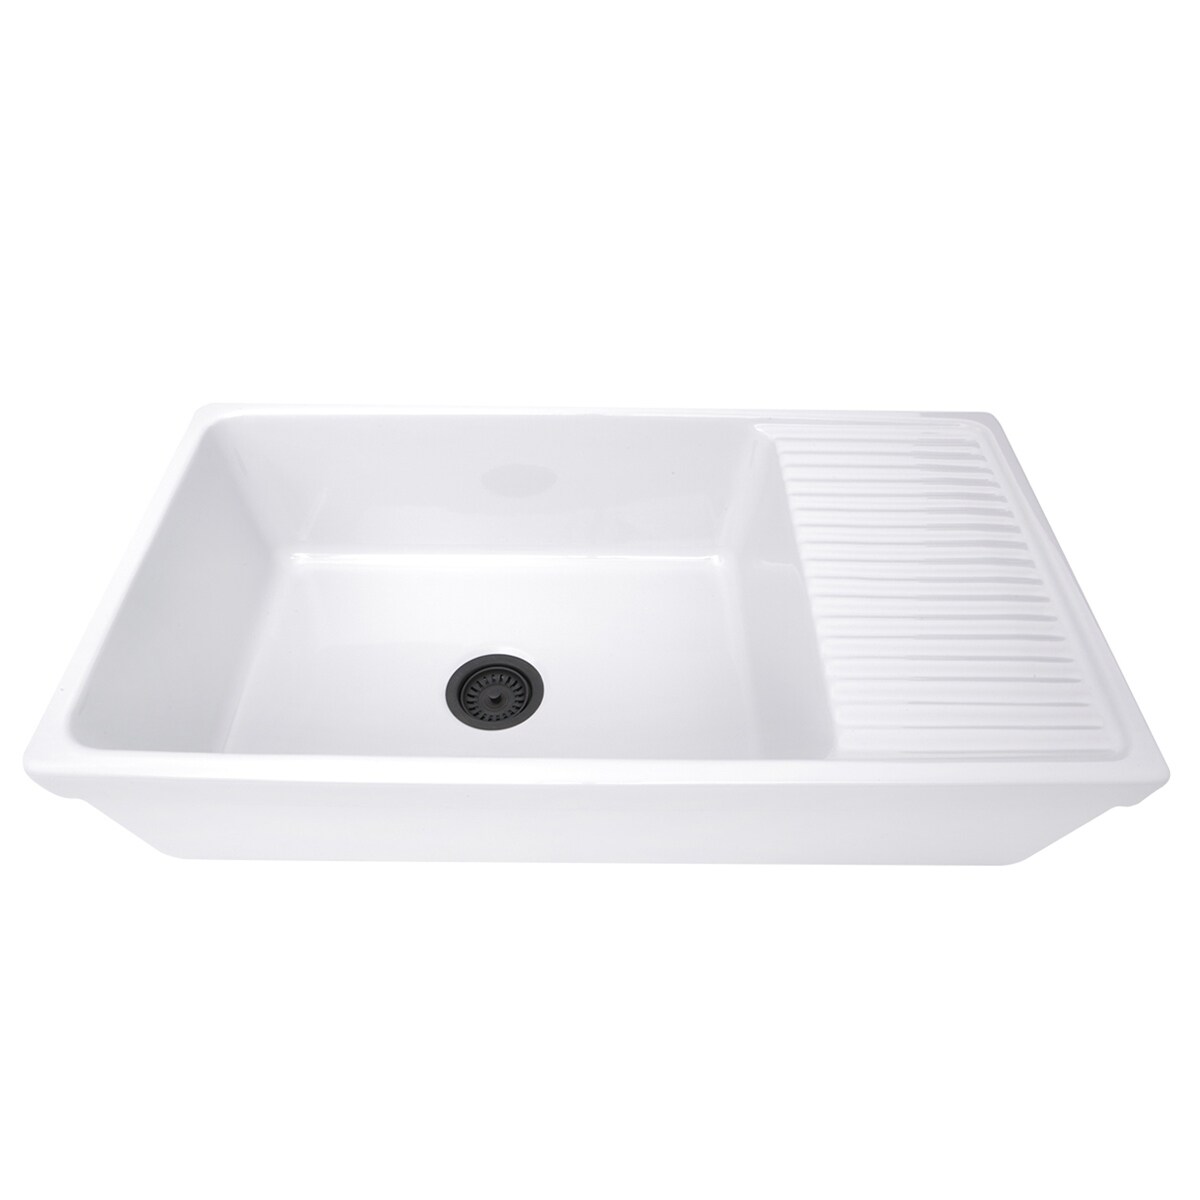 Installing Our Highback Drainboard Sink - Wildfire Interiors